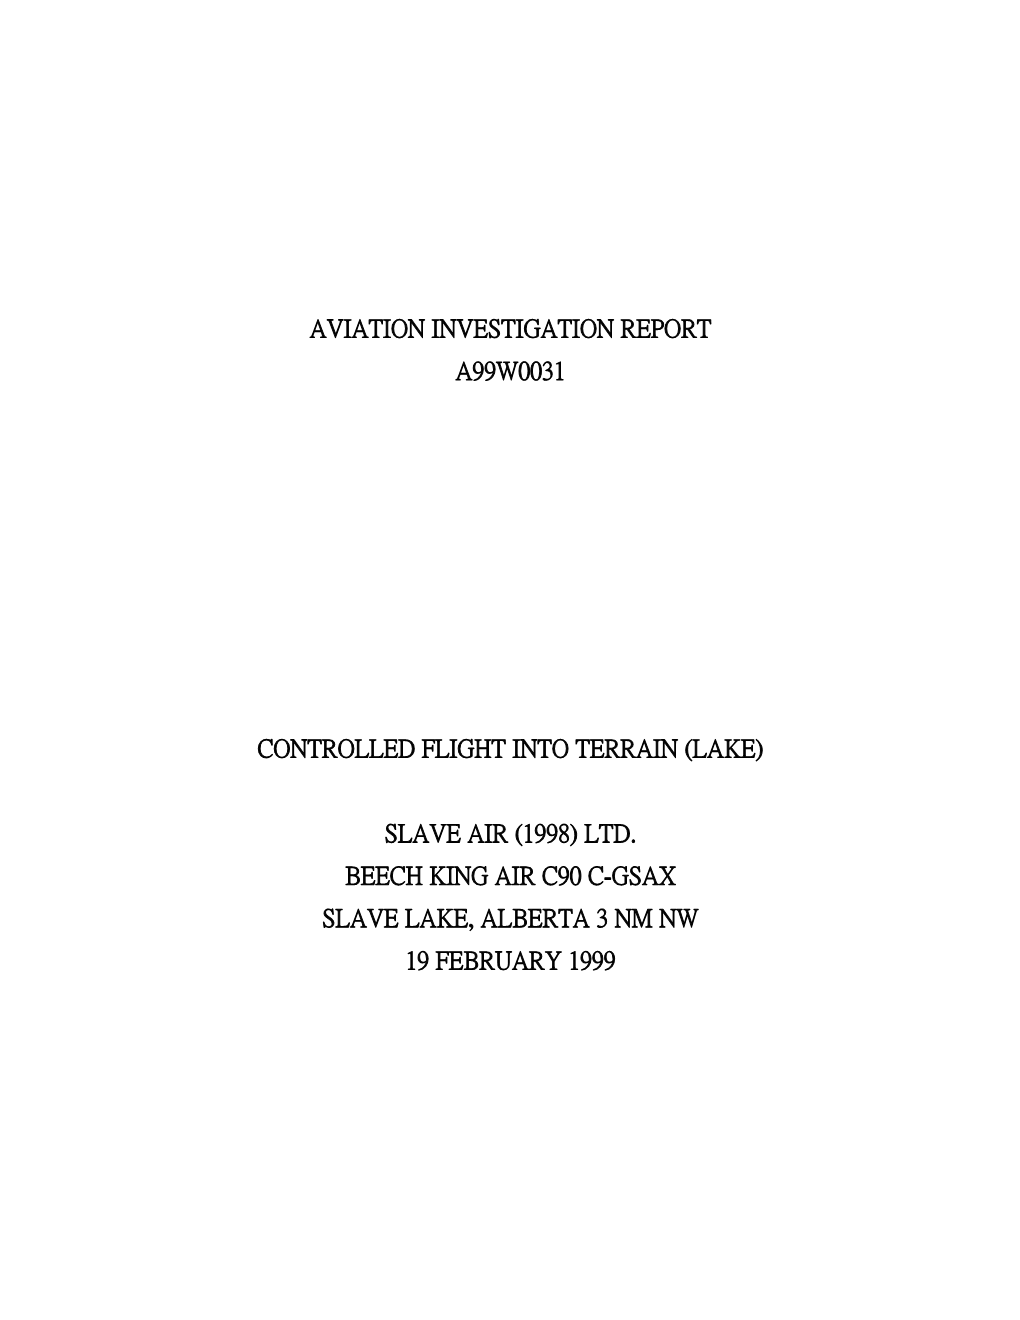 Aviation Investigation Report A99w0031 Controlled Flight